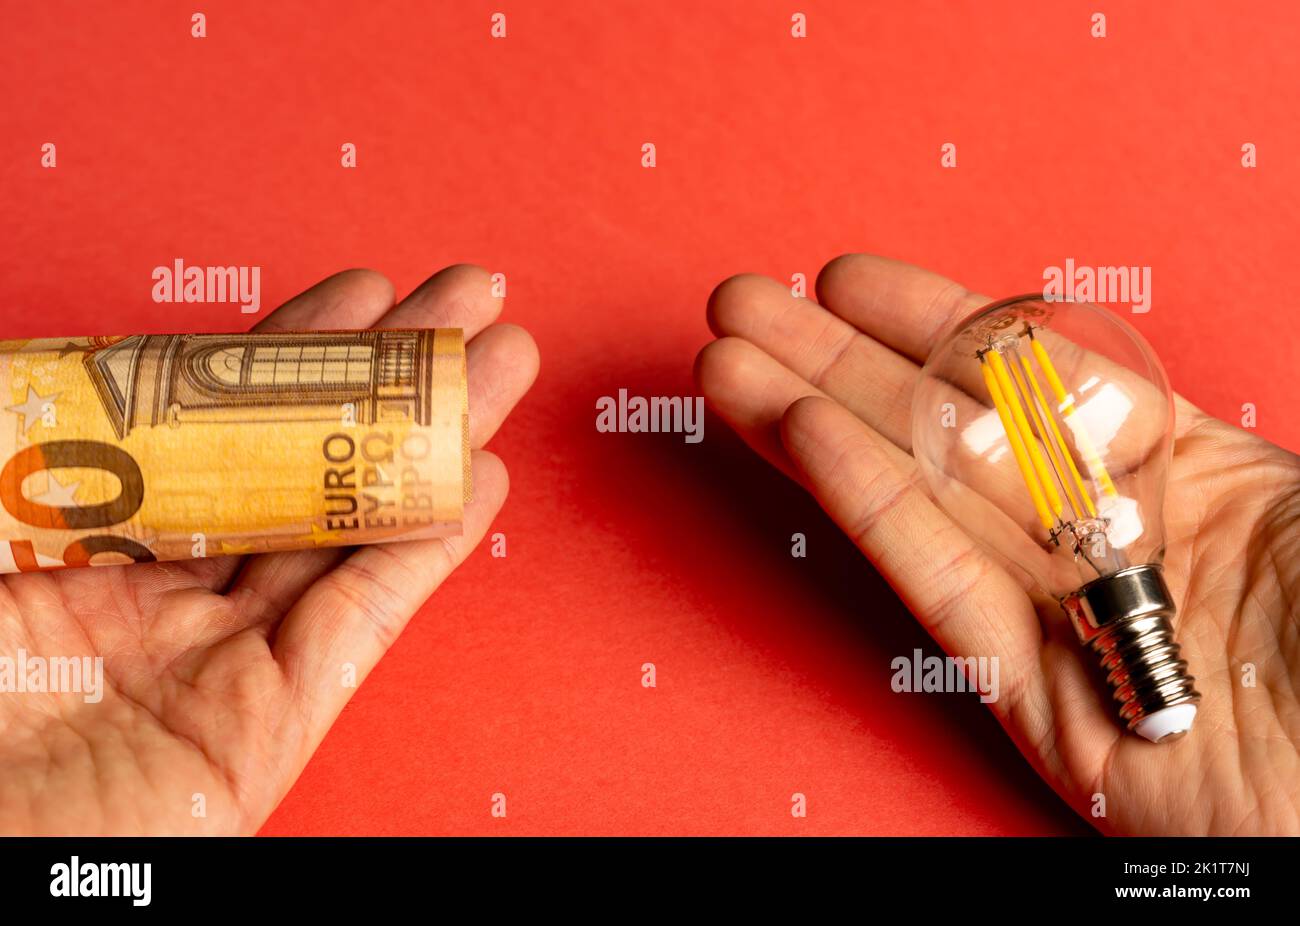 Man holding a light bulb and a euro banknote in each hand. Concept of decision between money or energy. Stock Photo